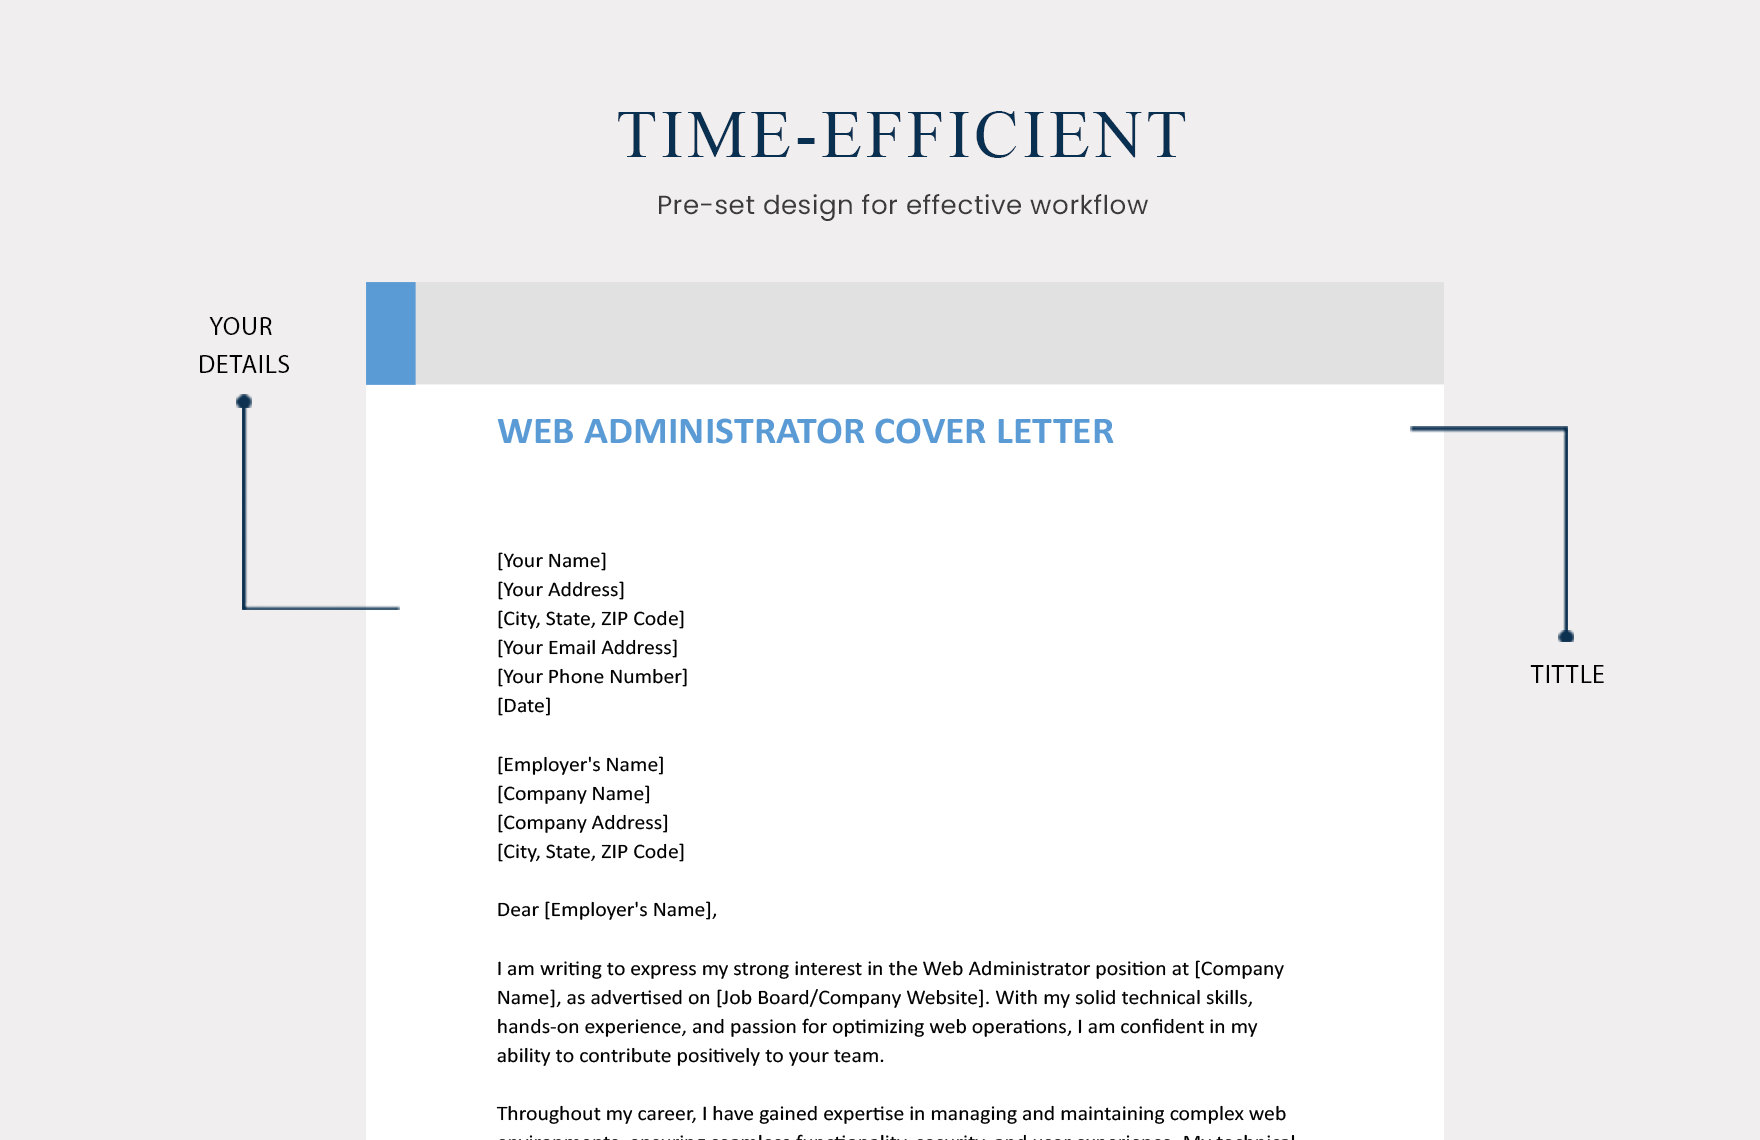 Web Administrator Cover Letter